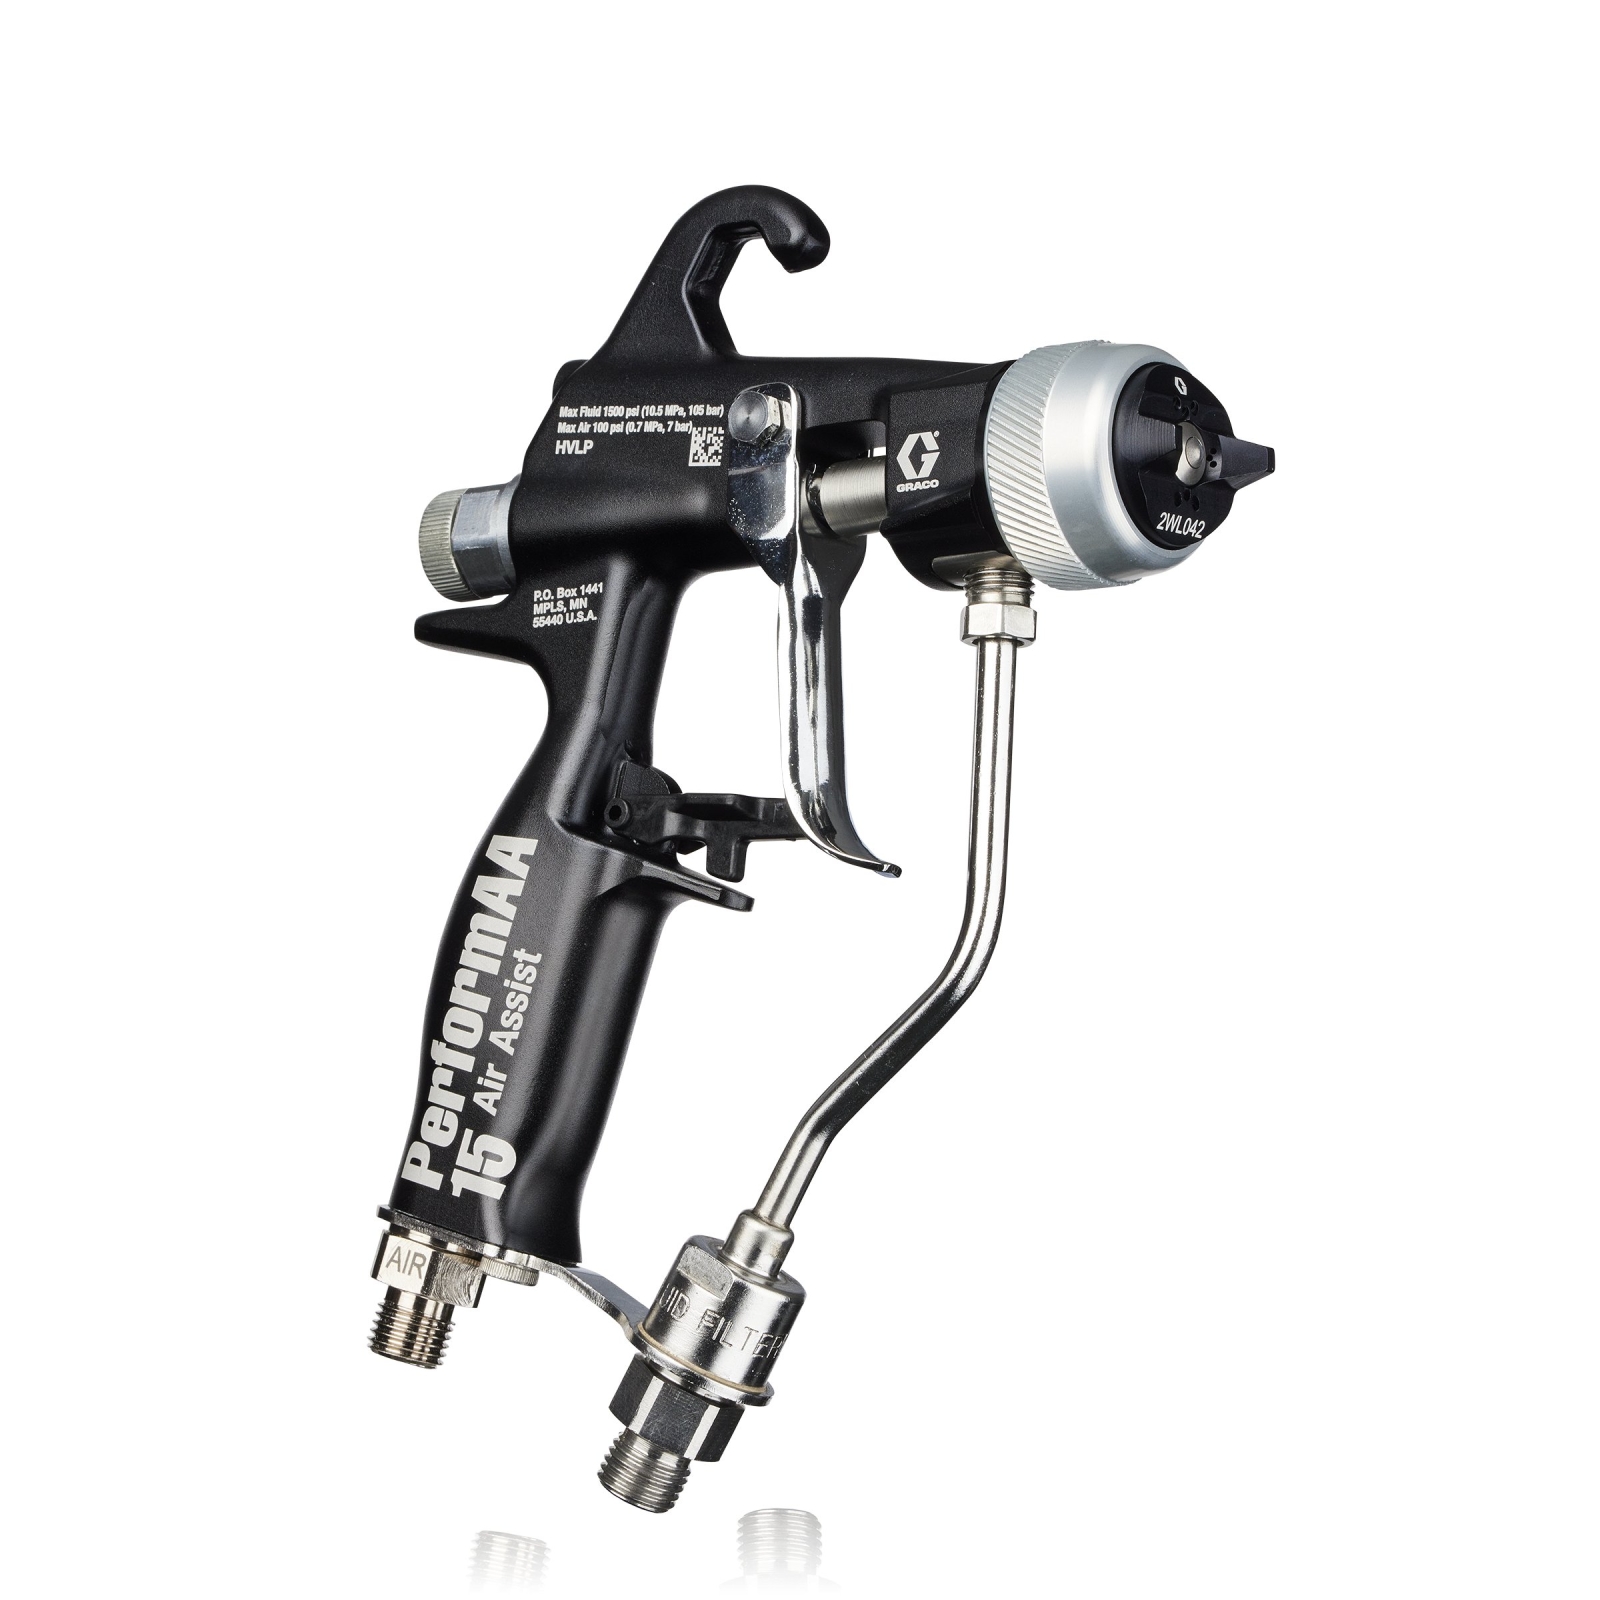 PerformAA 1500 Air Assist Gun with Wood Lacquer air cap and light 